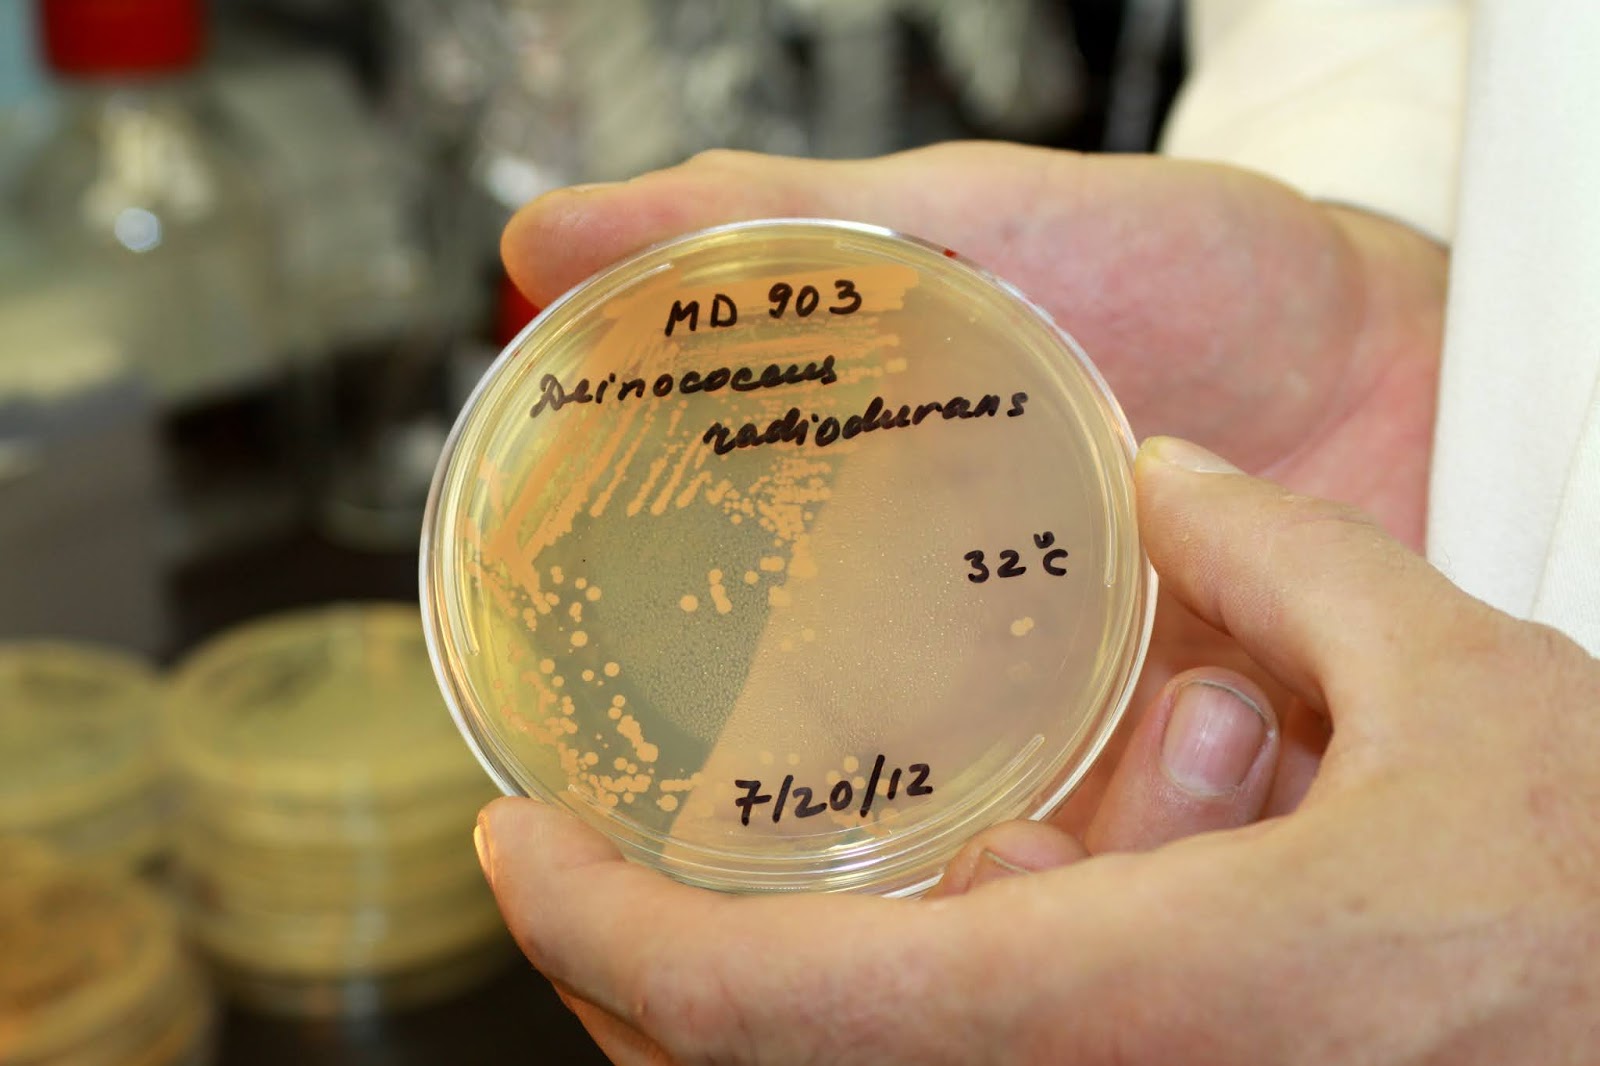 Radiation-resistant bacterium could be key to faster, safer, more